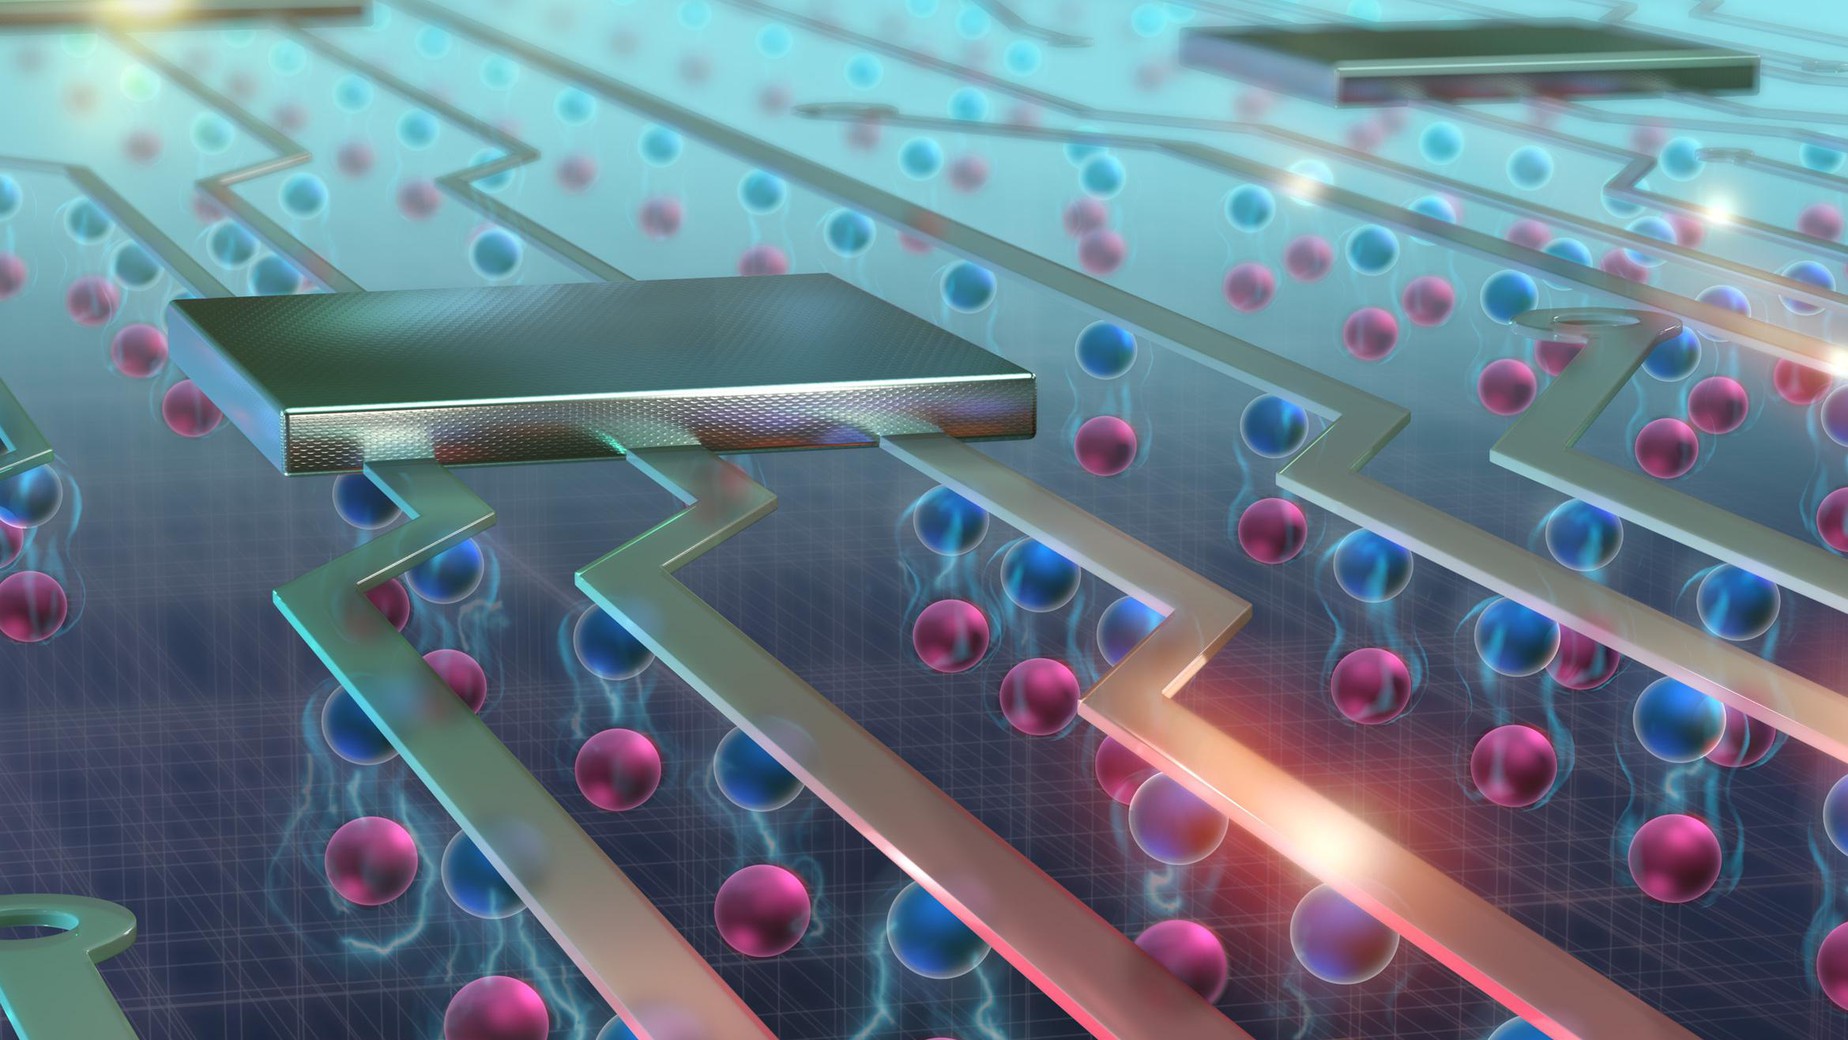 Excitons Pave the Way to More Efficient Electronics